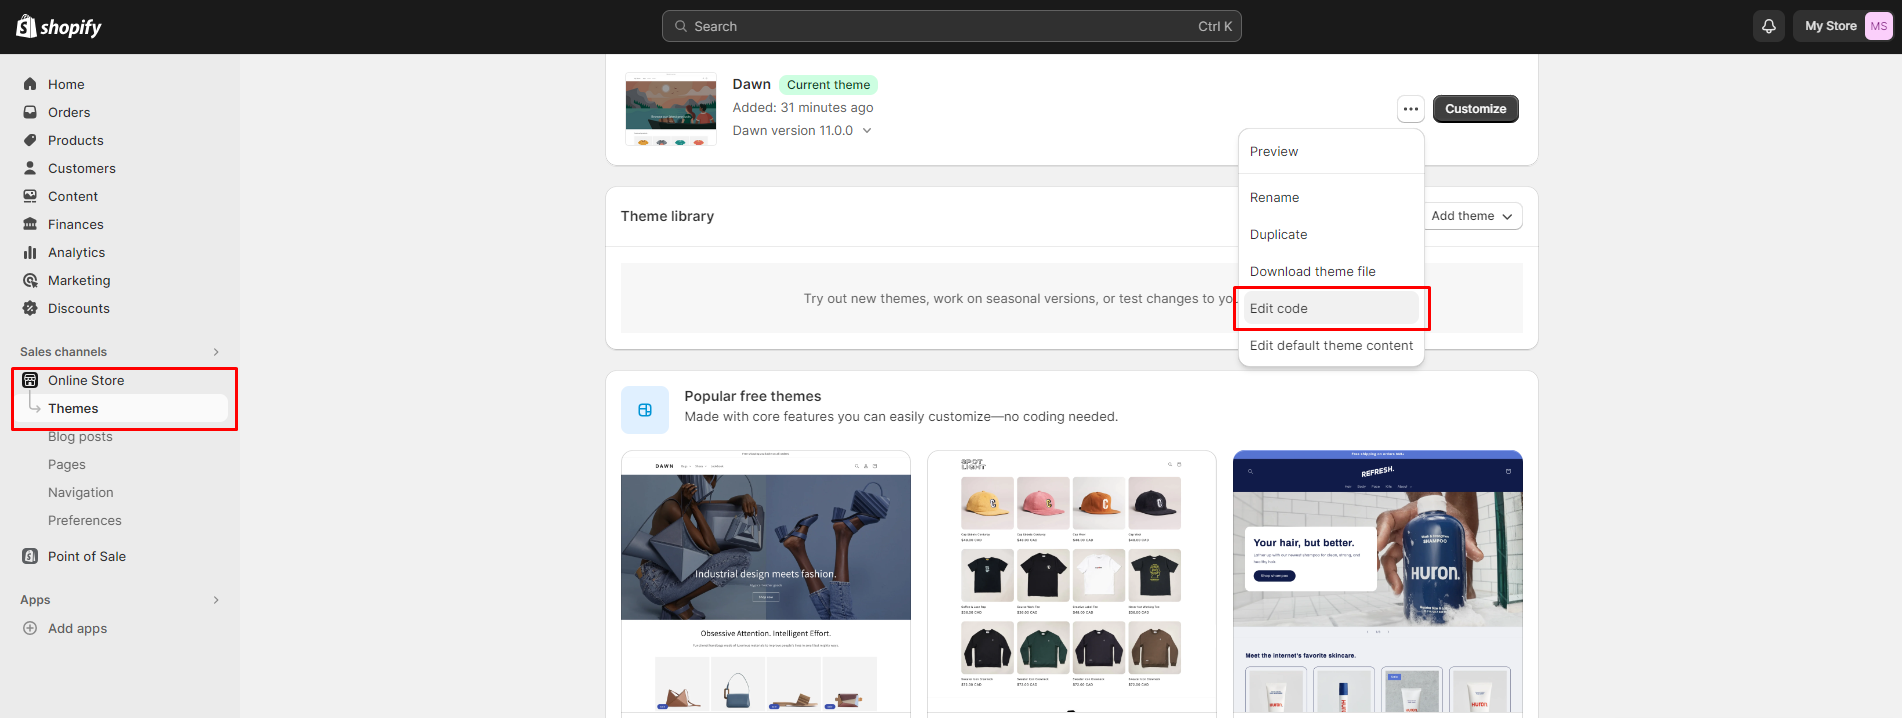 How to change font in Shopify - proceed to Online Store > Themes > Actions > Edit Code